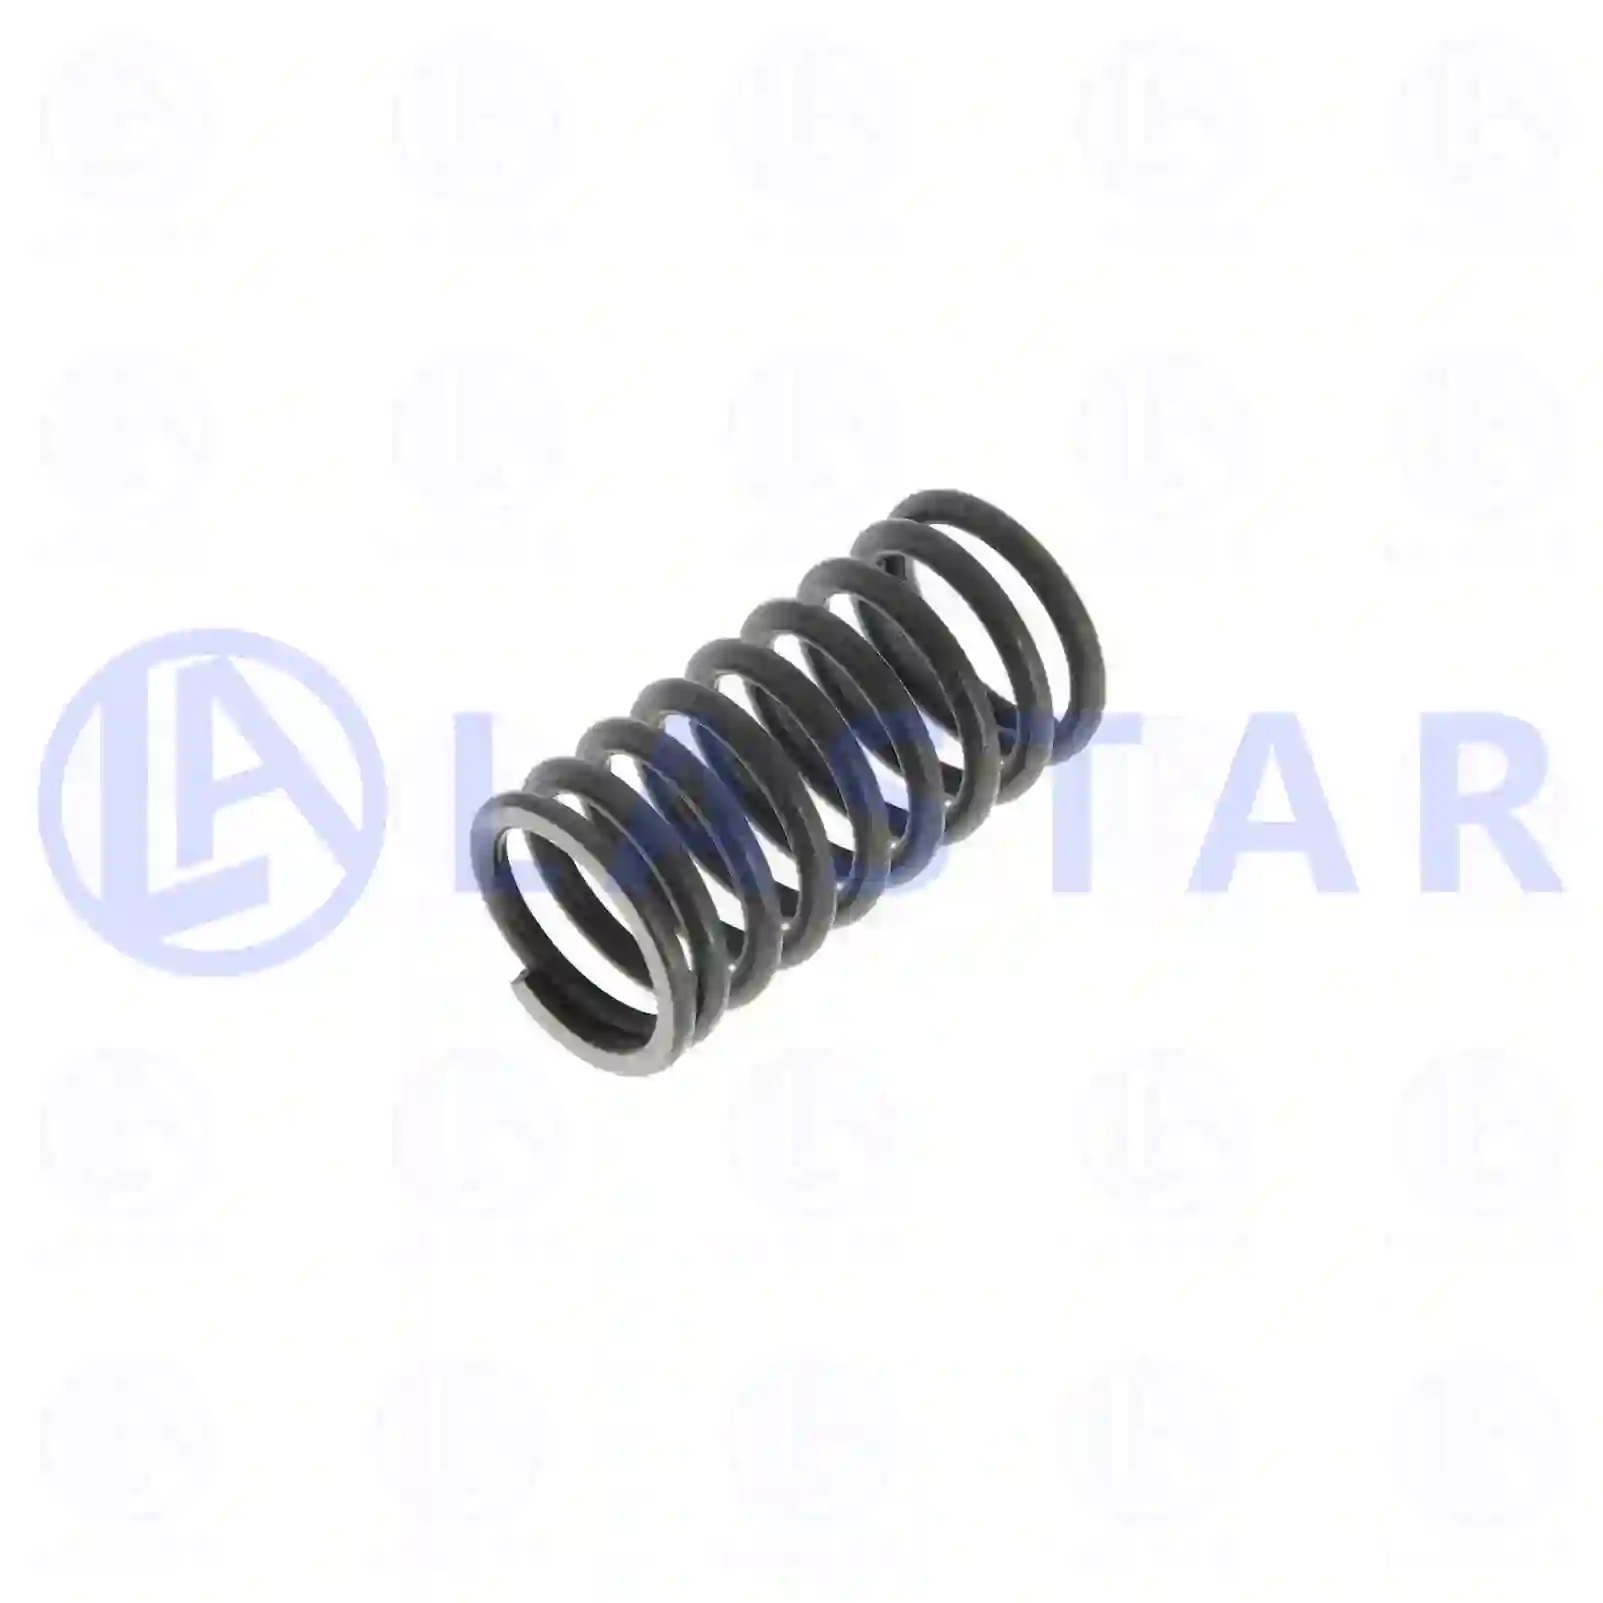 Valve spring, intake and exhaust, inner, 77704810, 170043, 1728922, ZG40324-0008 ||  77704810 Lastar Spare Part | Truck Spare Parts, Auotomotive Spare Parts Valve spring, intake and exhaust, inner, 77704810, 170043, 1728922, ZG40324-0008 ||  77704810 Lastar Spare Part | Truck Spare Parts, Auotomotive Spare Parts